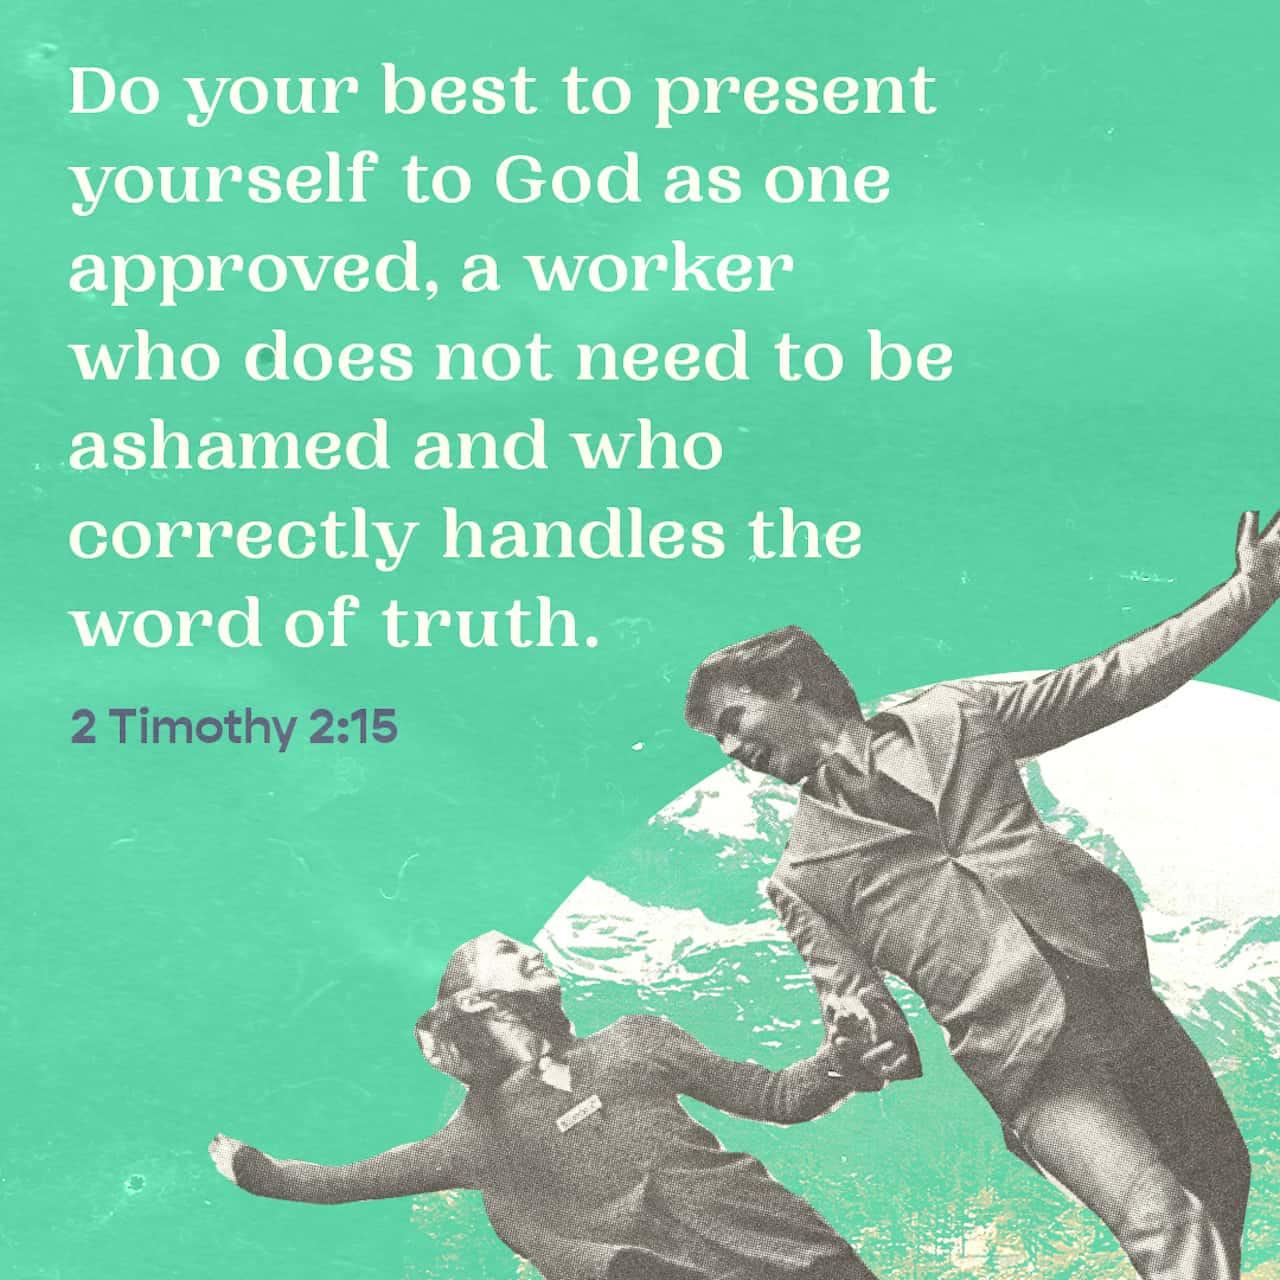 Bible Verse of the Day - day 83 - image 62604 (2 Timothy 2:14-26)